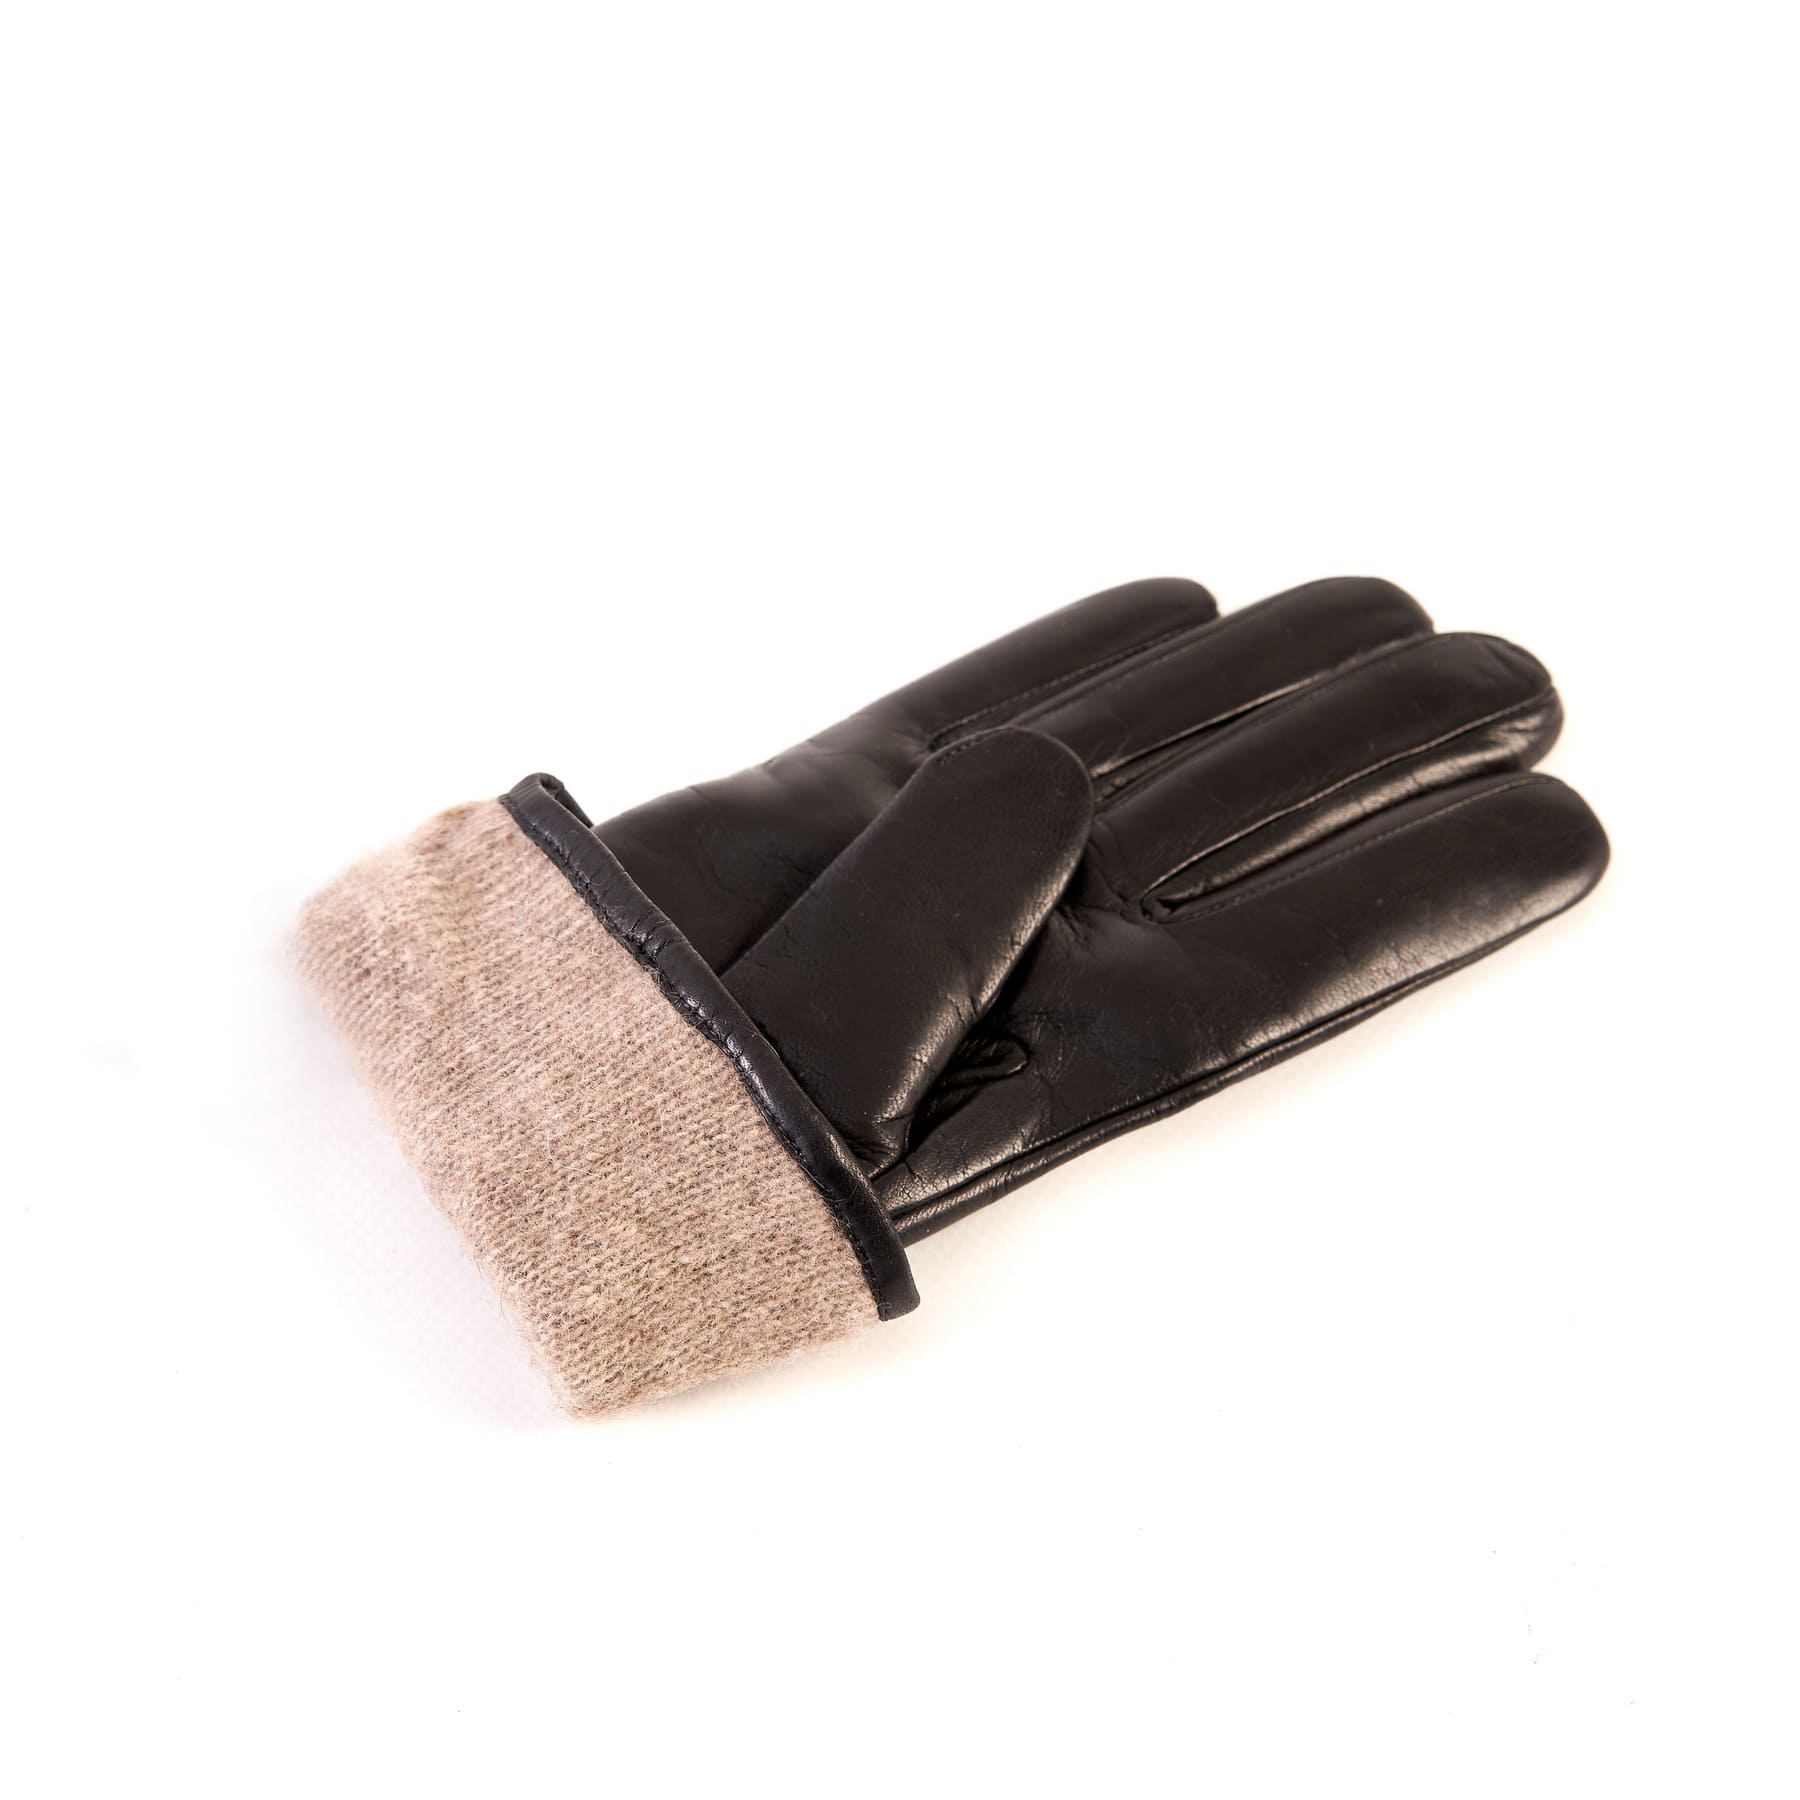 Women's black nappa leather gloves with suede panel insert on top cashmere lined